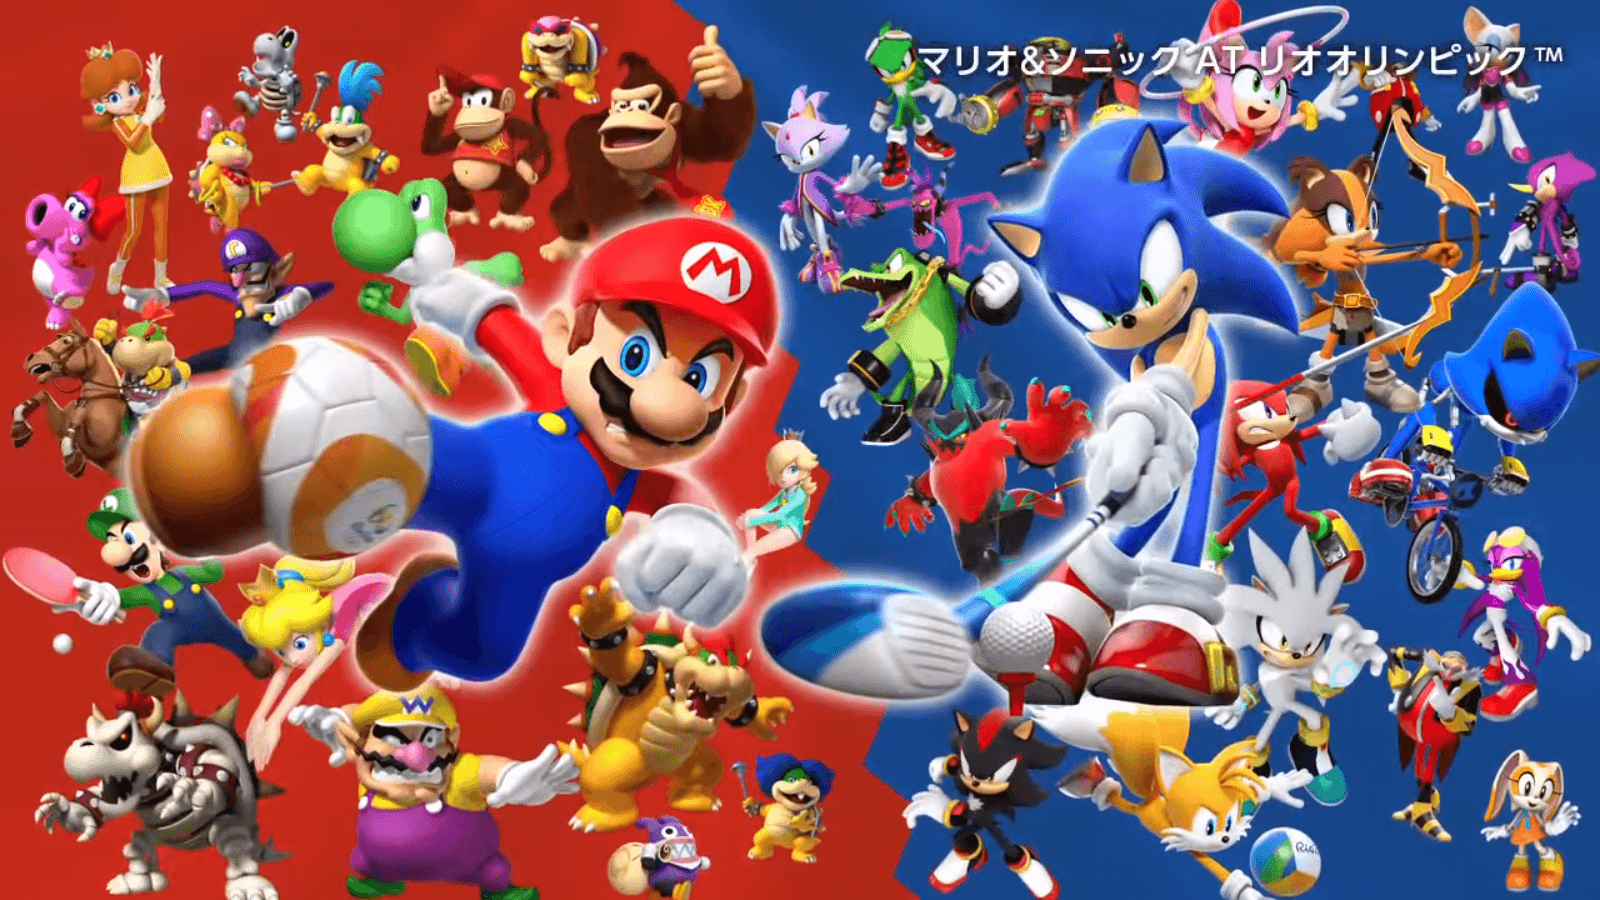 Rio 2016 Character Roster. Sonic the Hedgehog